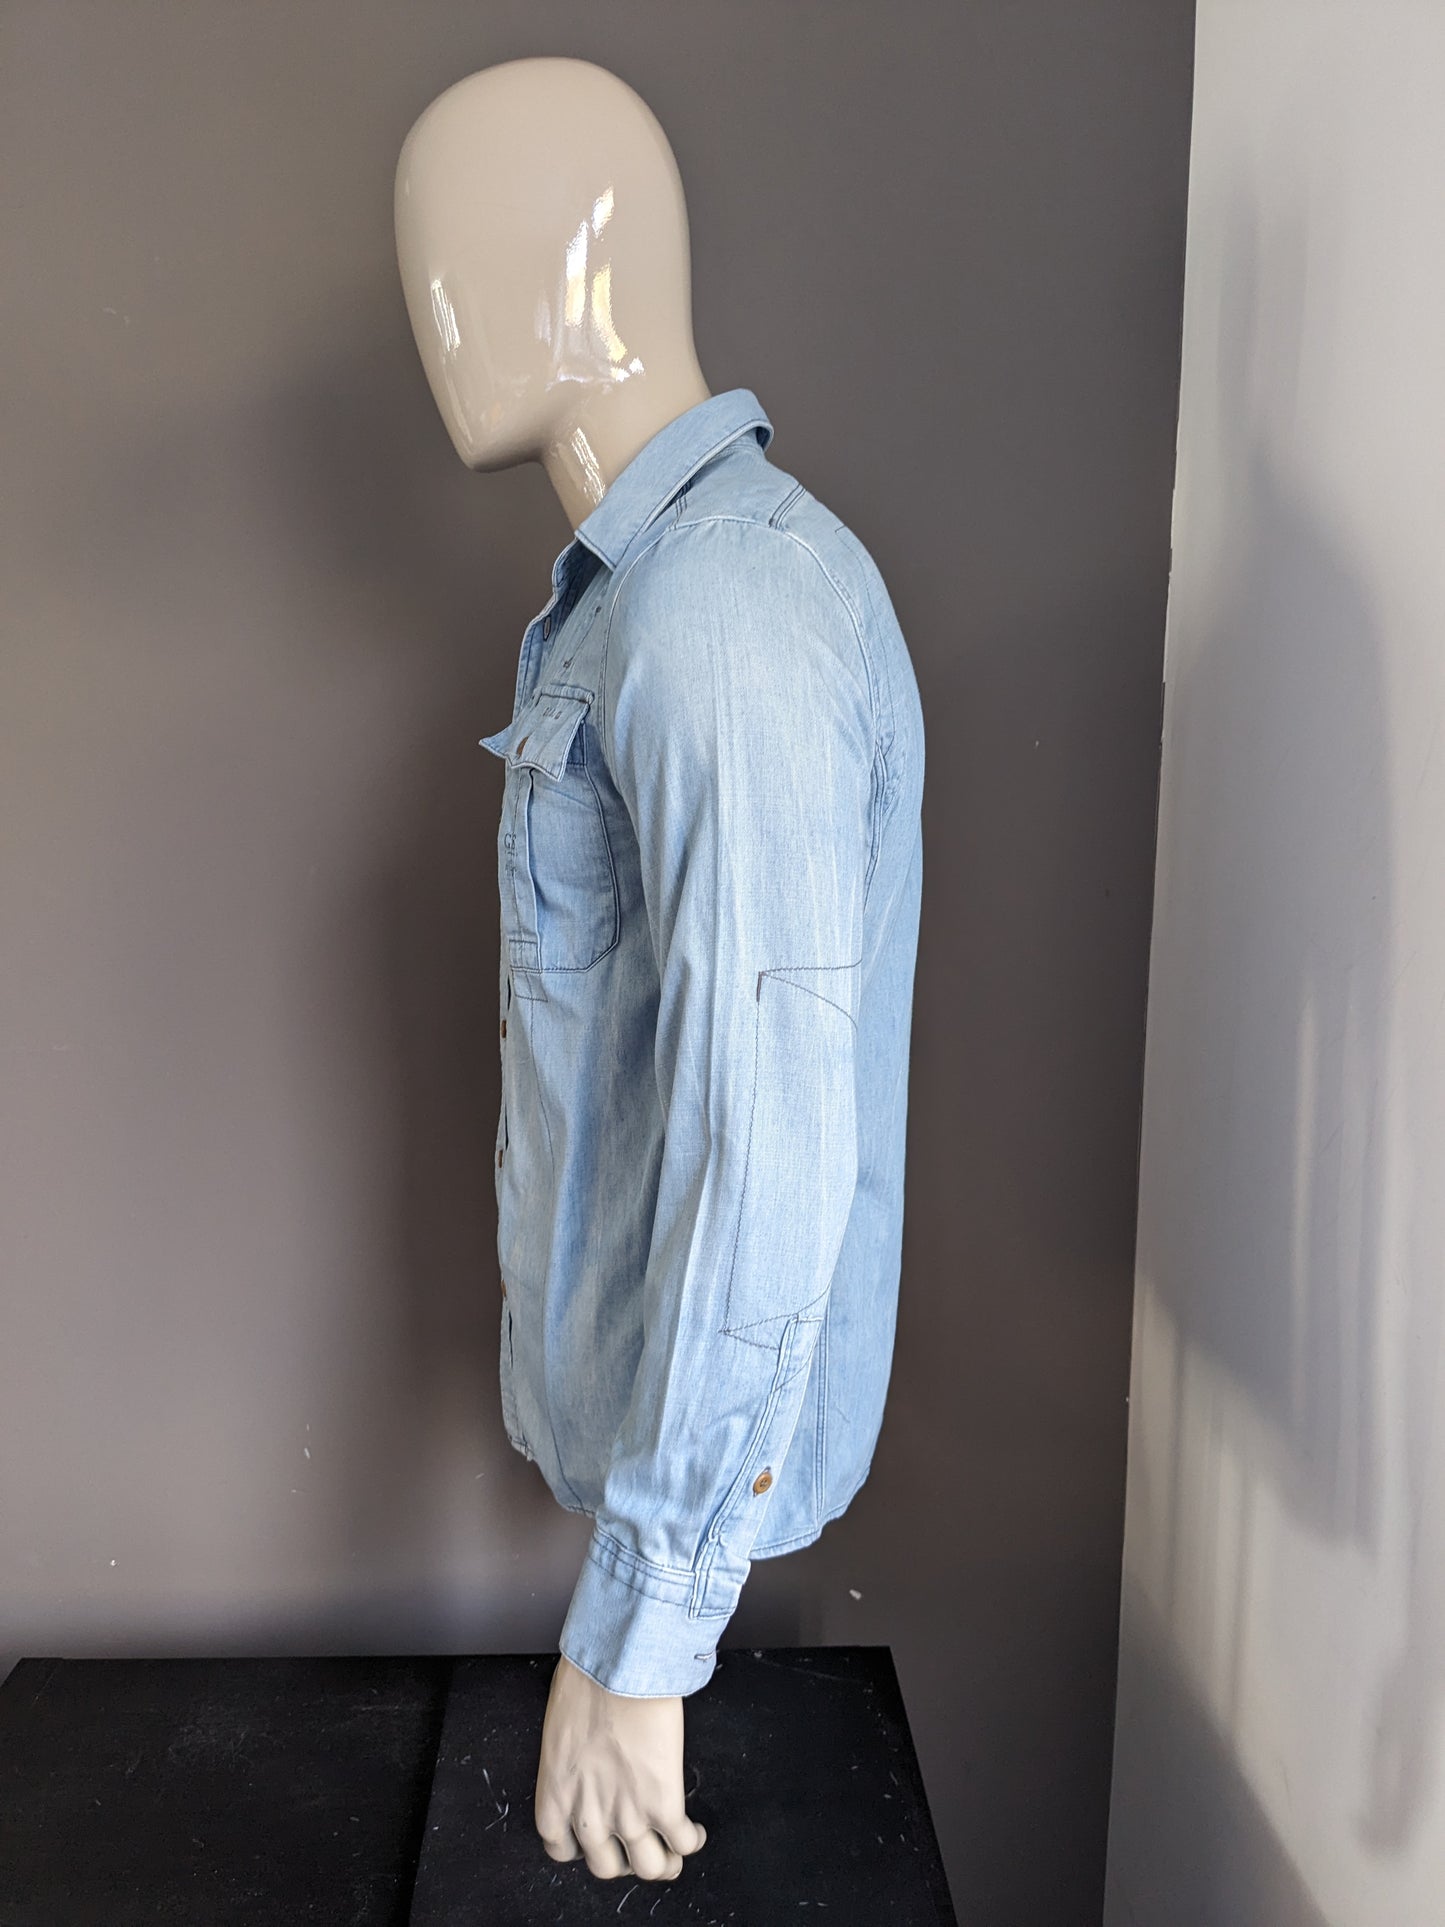 Chemise G-Star Raw Jeans. Couleur bleu clair. Taille S.